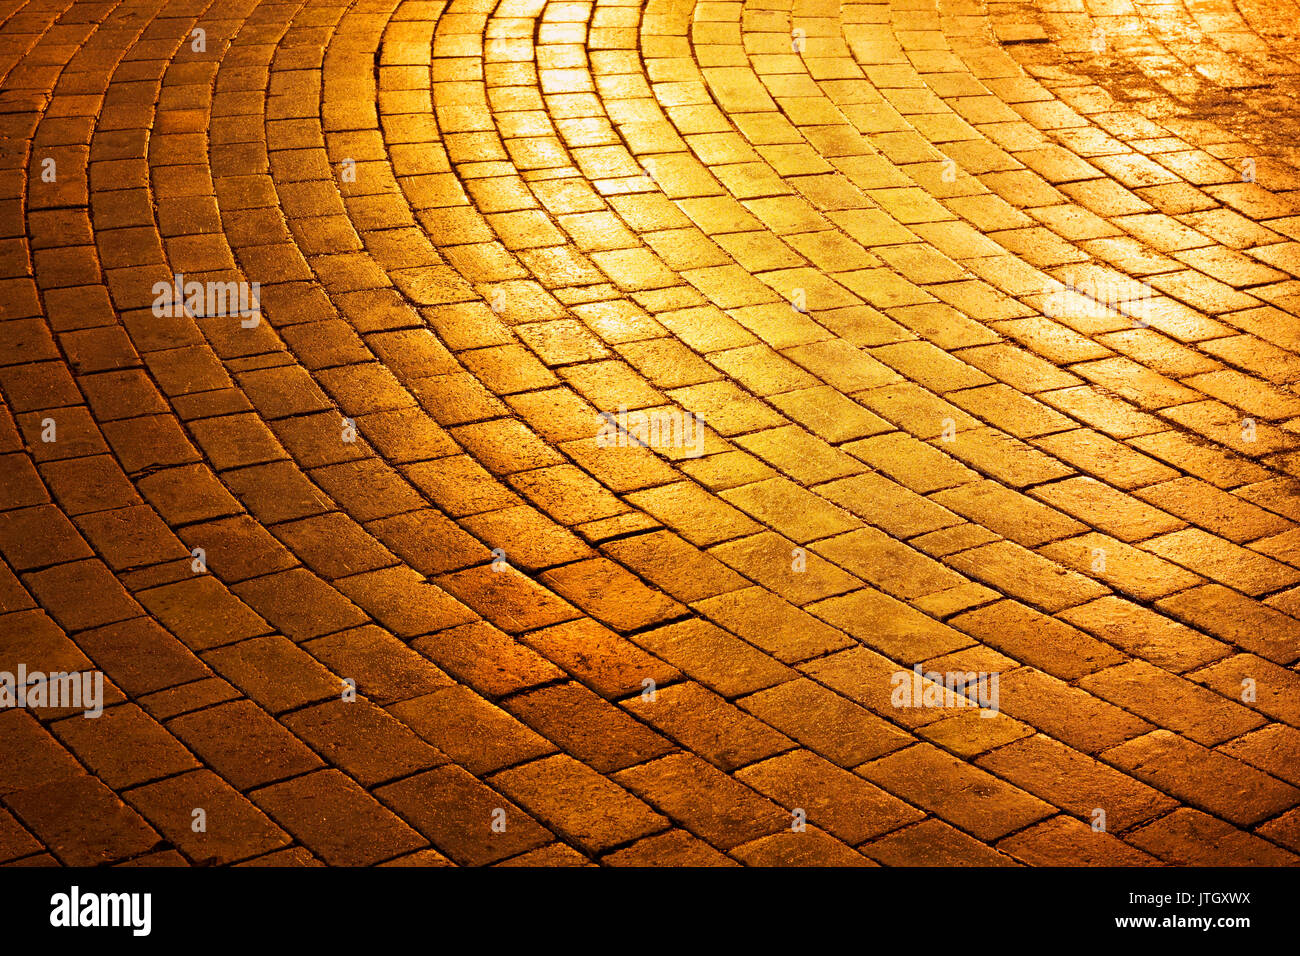 Golden brick circle shaped pavement road in the park Stock Photo